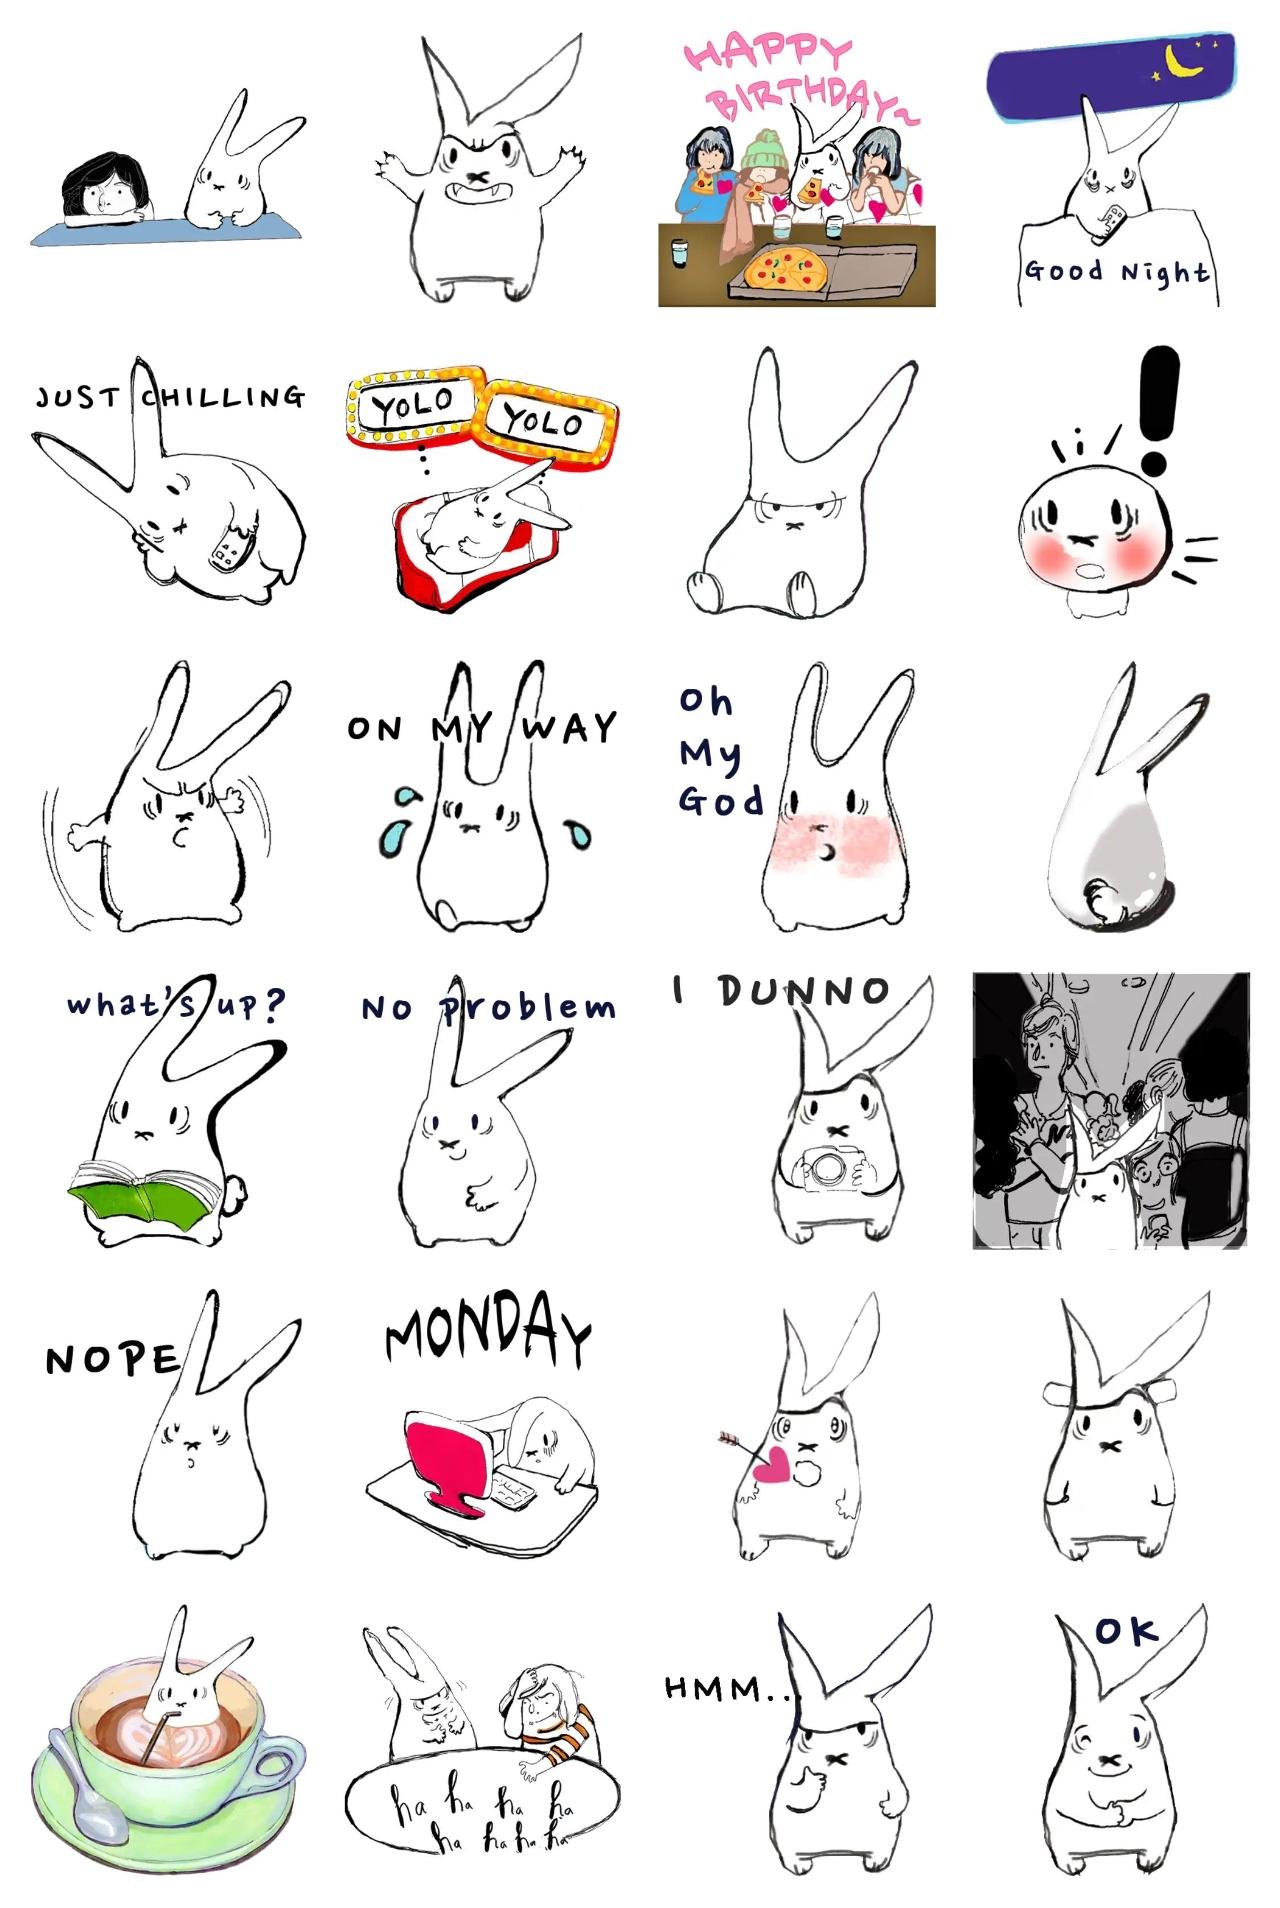 Snowbun Junior Animation/Cartoon,Animals sticker pack for Whatsapp, Telegram, Signal, and others chatting and message apps